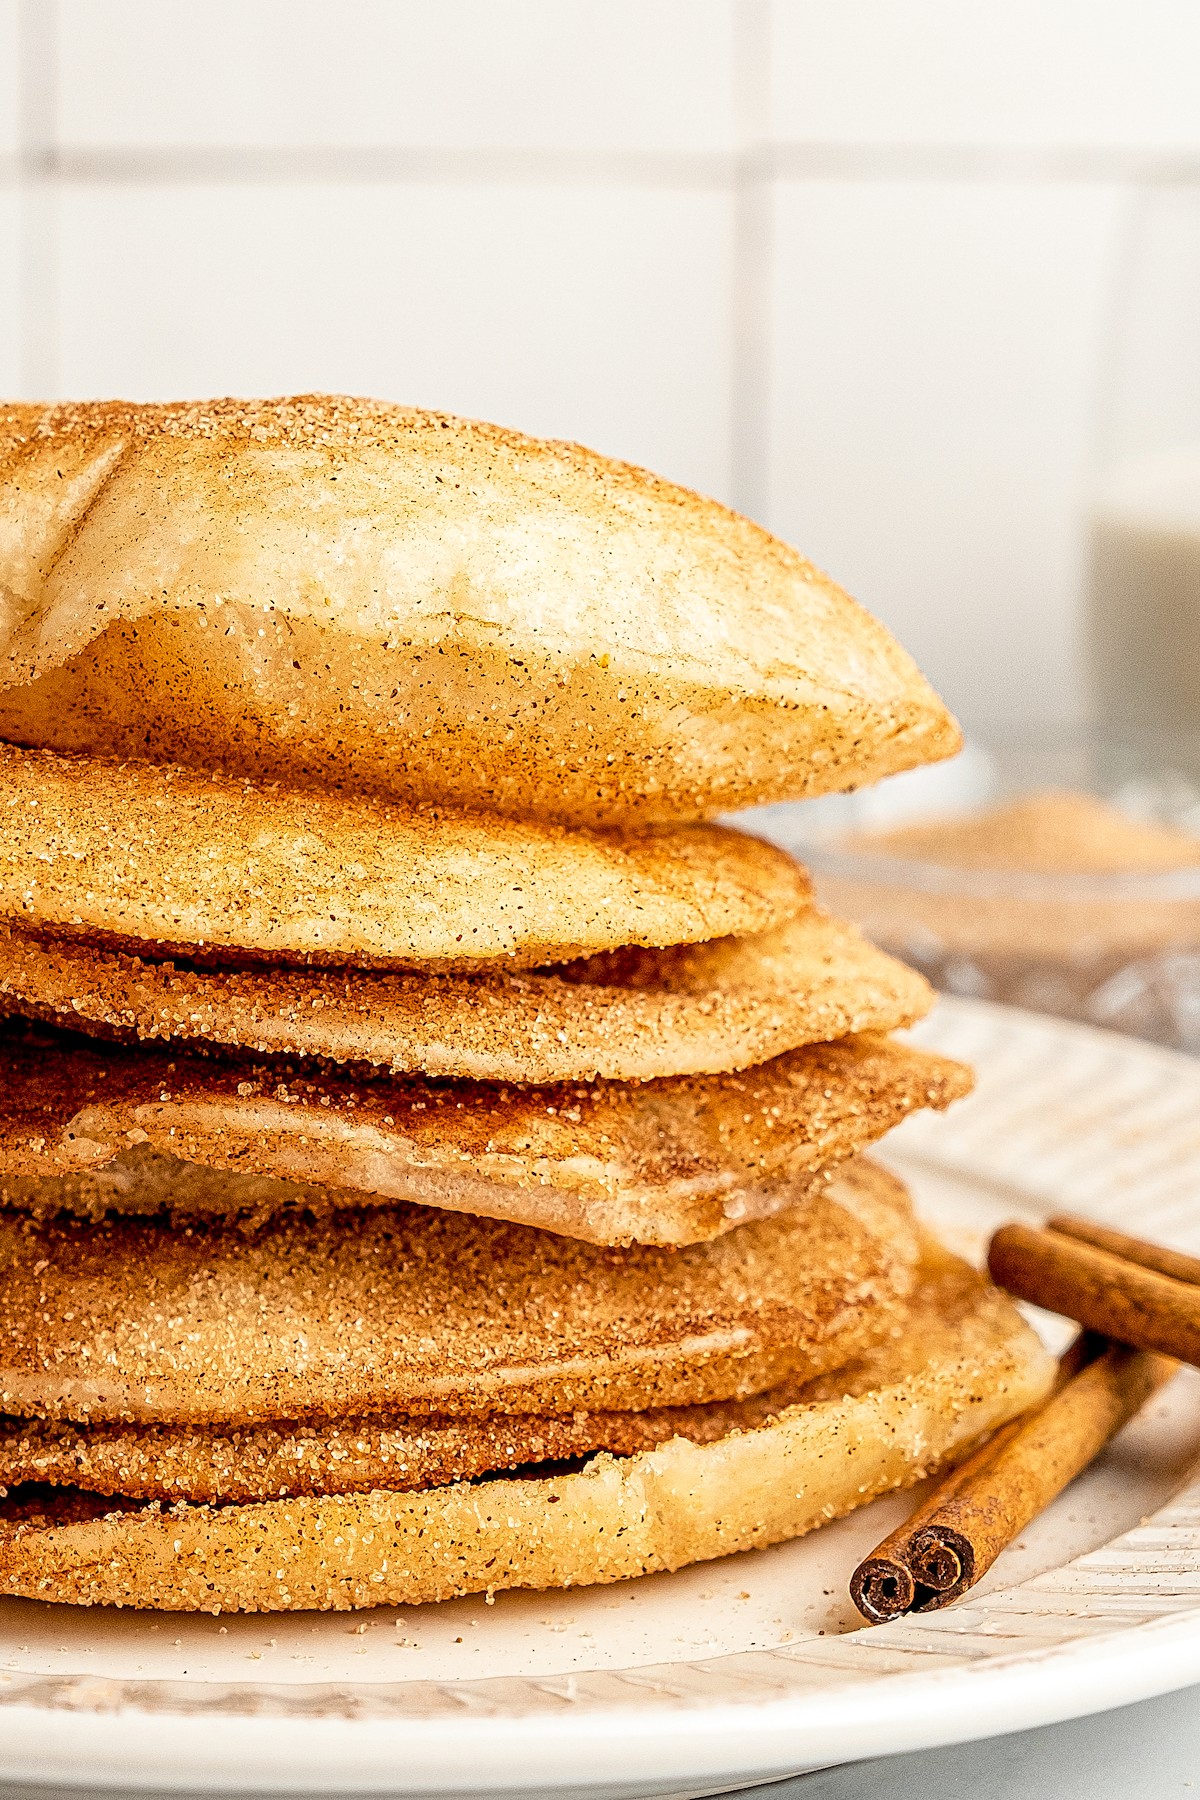 Buñuelos stacked on a plate with a cinnamon stick.